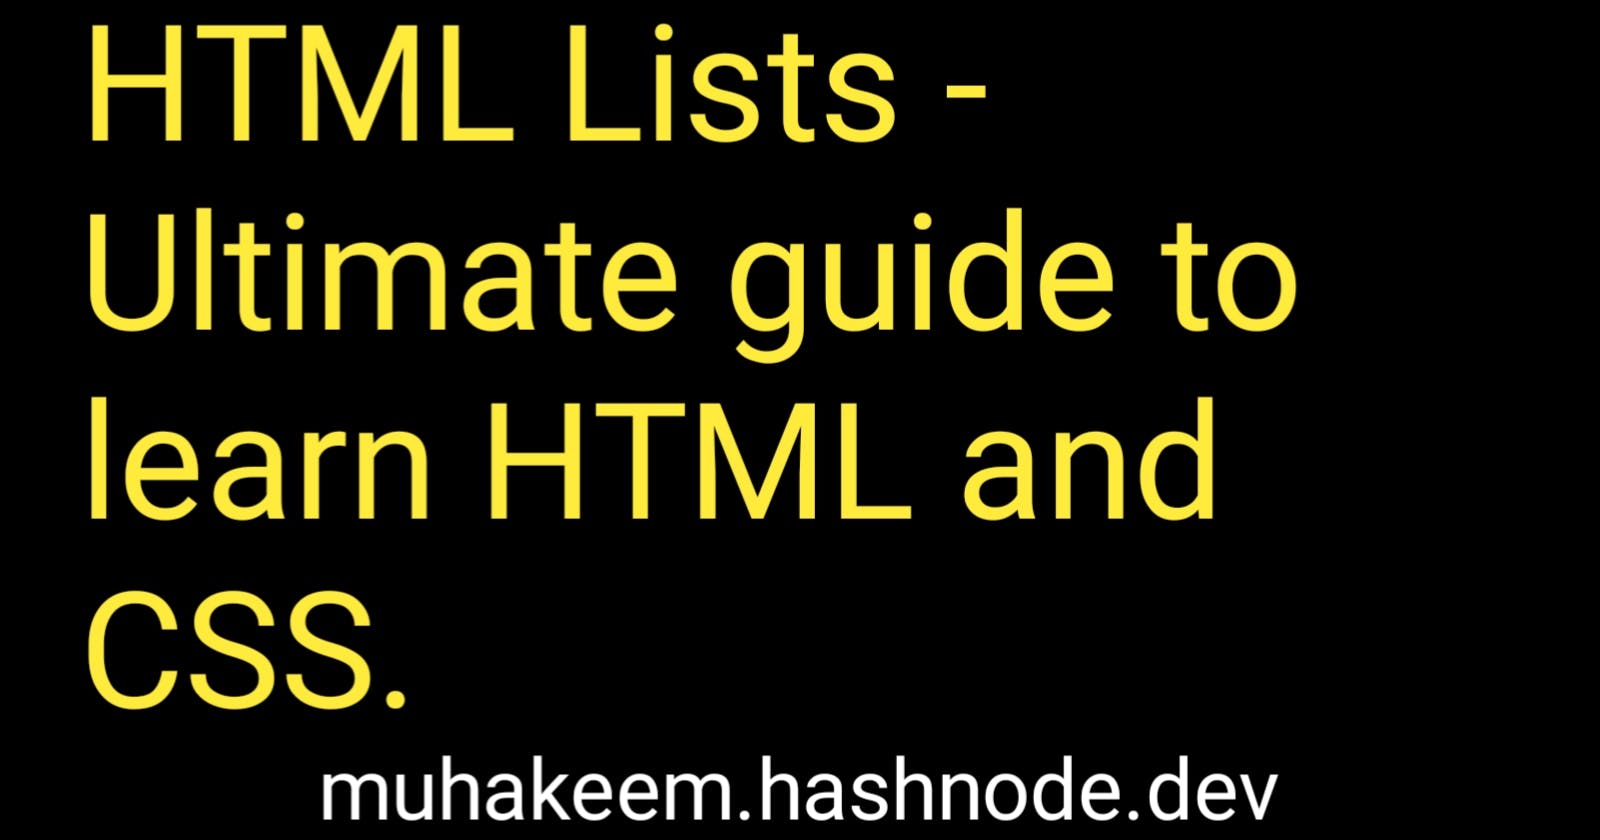 HTML Lists - Ultimate guide to learn HTML and CSS.